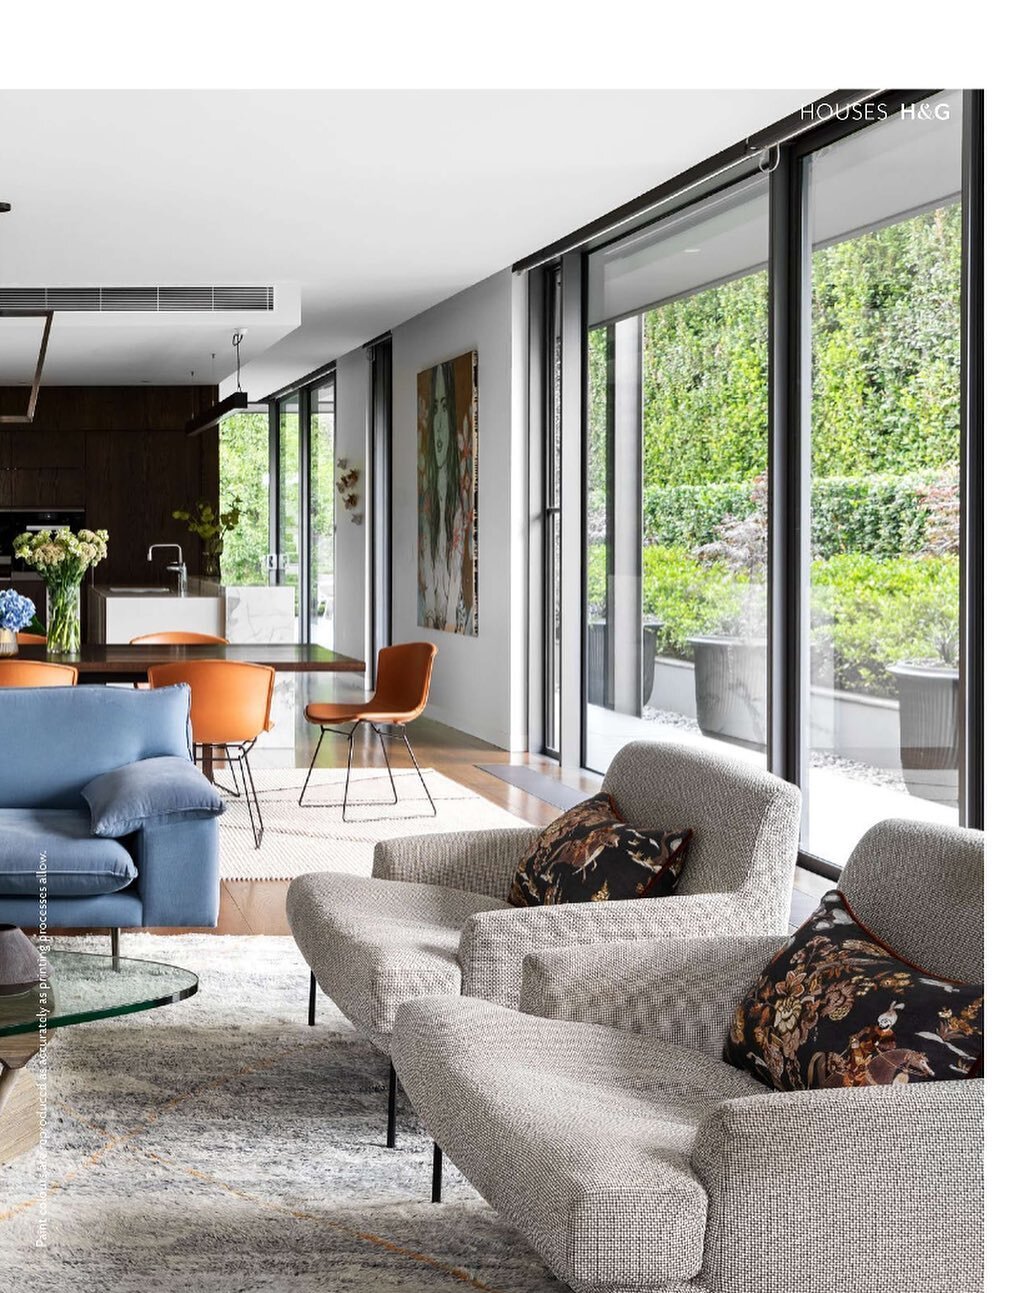 Eaglemont feature in May House &amp; Garden

Architect:&nbsp;@darrencarnellarchitects
Photo shoot styling:&nbsp;@olgalewisstyling&nbsp;@studiogeorg
Photography&nbsp;@gemmola